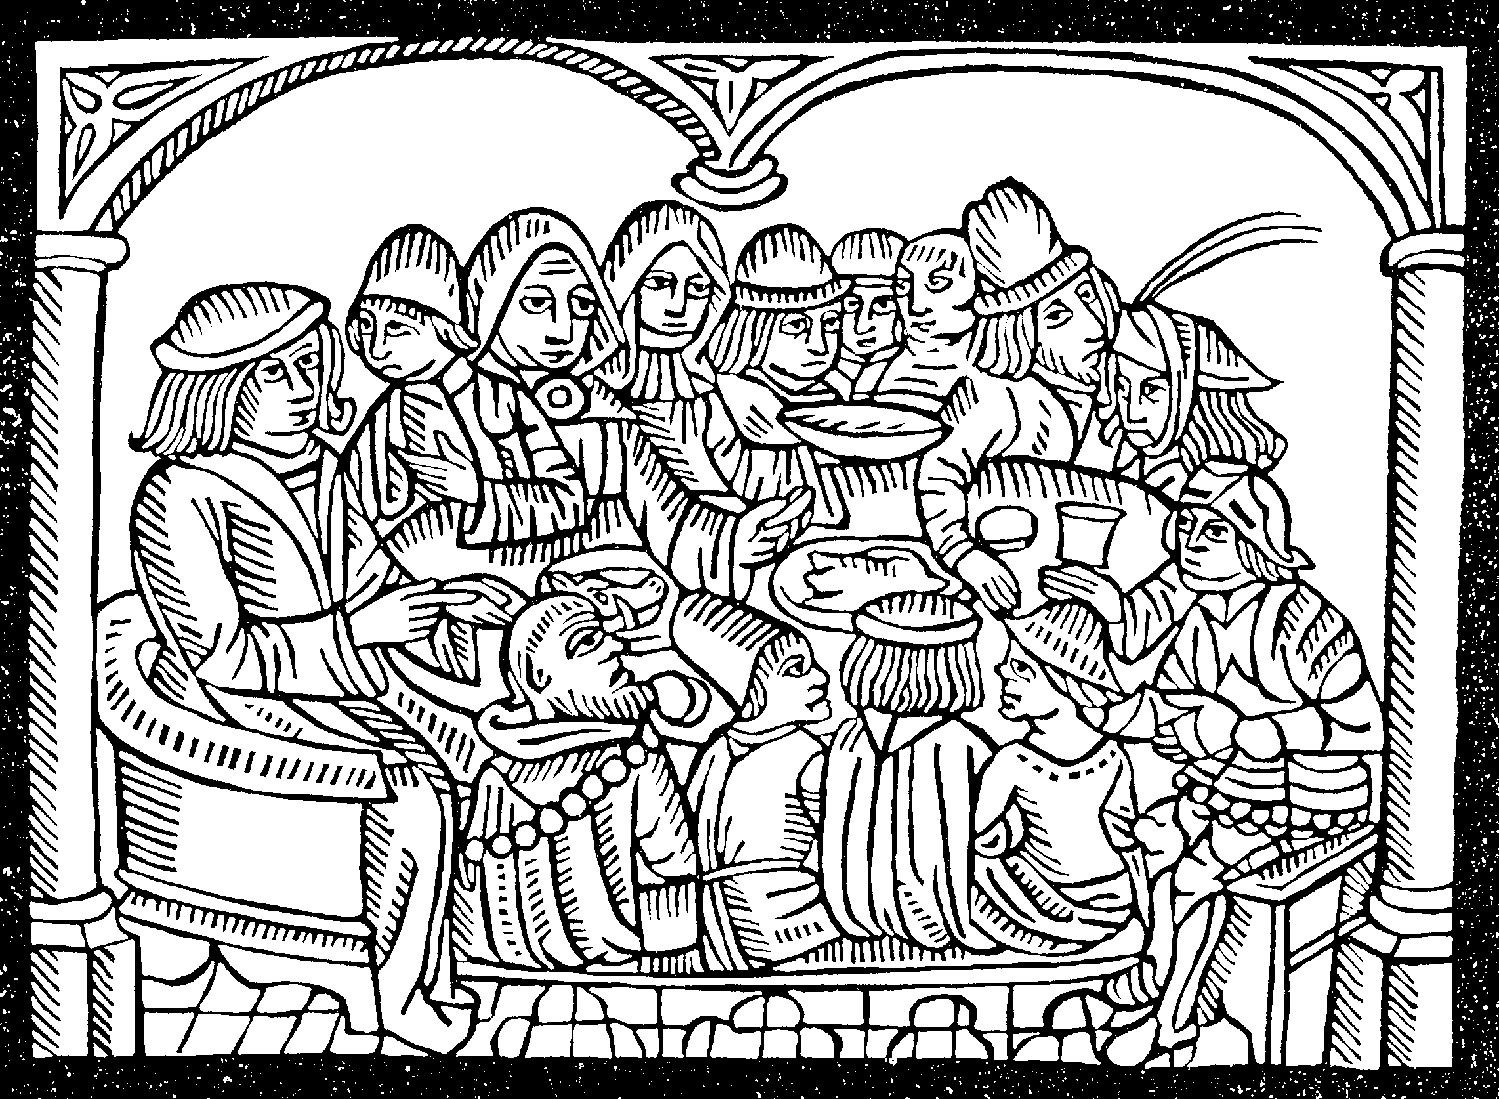 Coloring page of a meal in a castle from the Middle Ages, with a style of representation of men really typical of this era